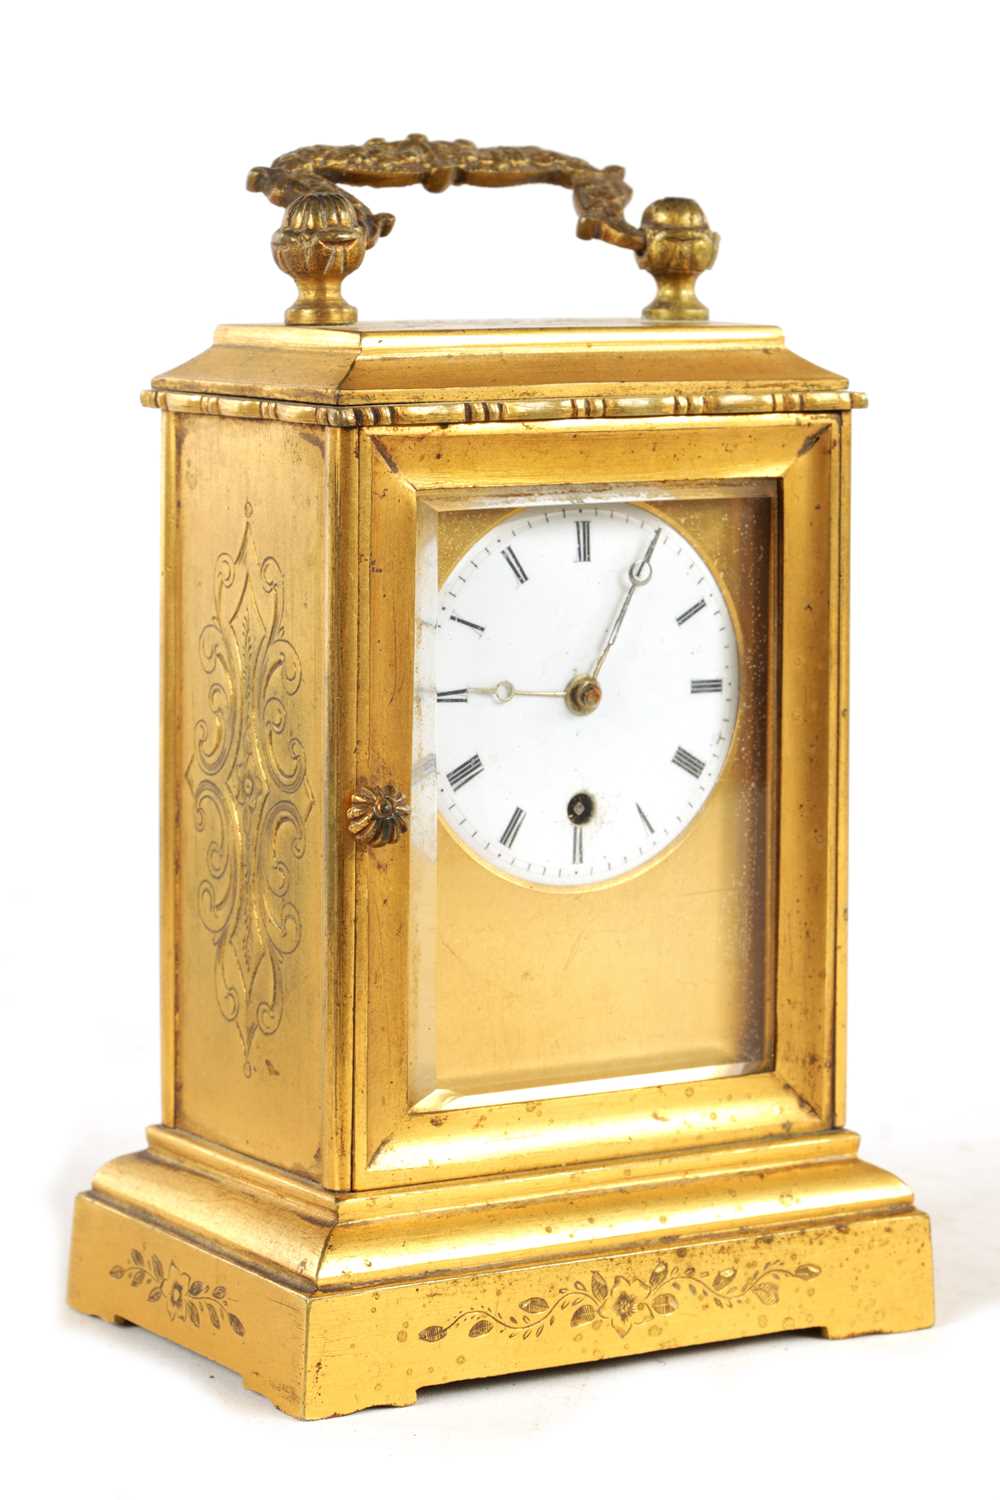 A MID 19TH CENTURY FRENCH GILT ENGRAVED CASED FUSEE CARRIAGE CLOCK